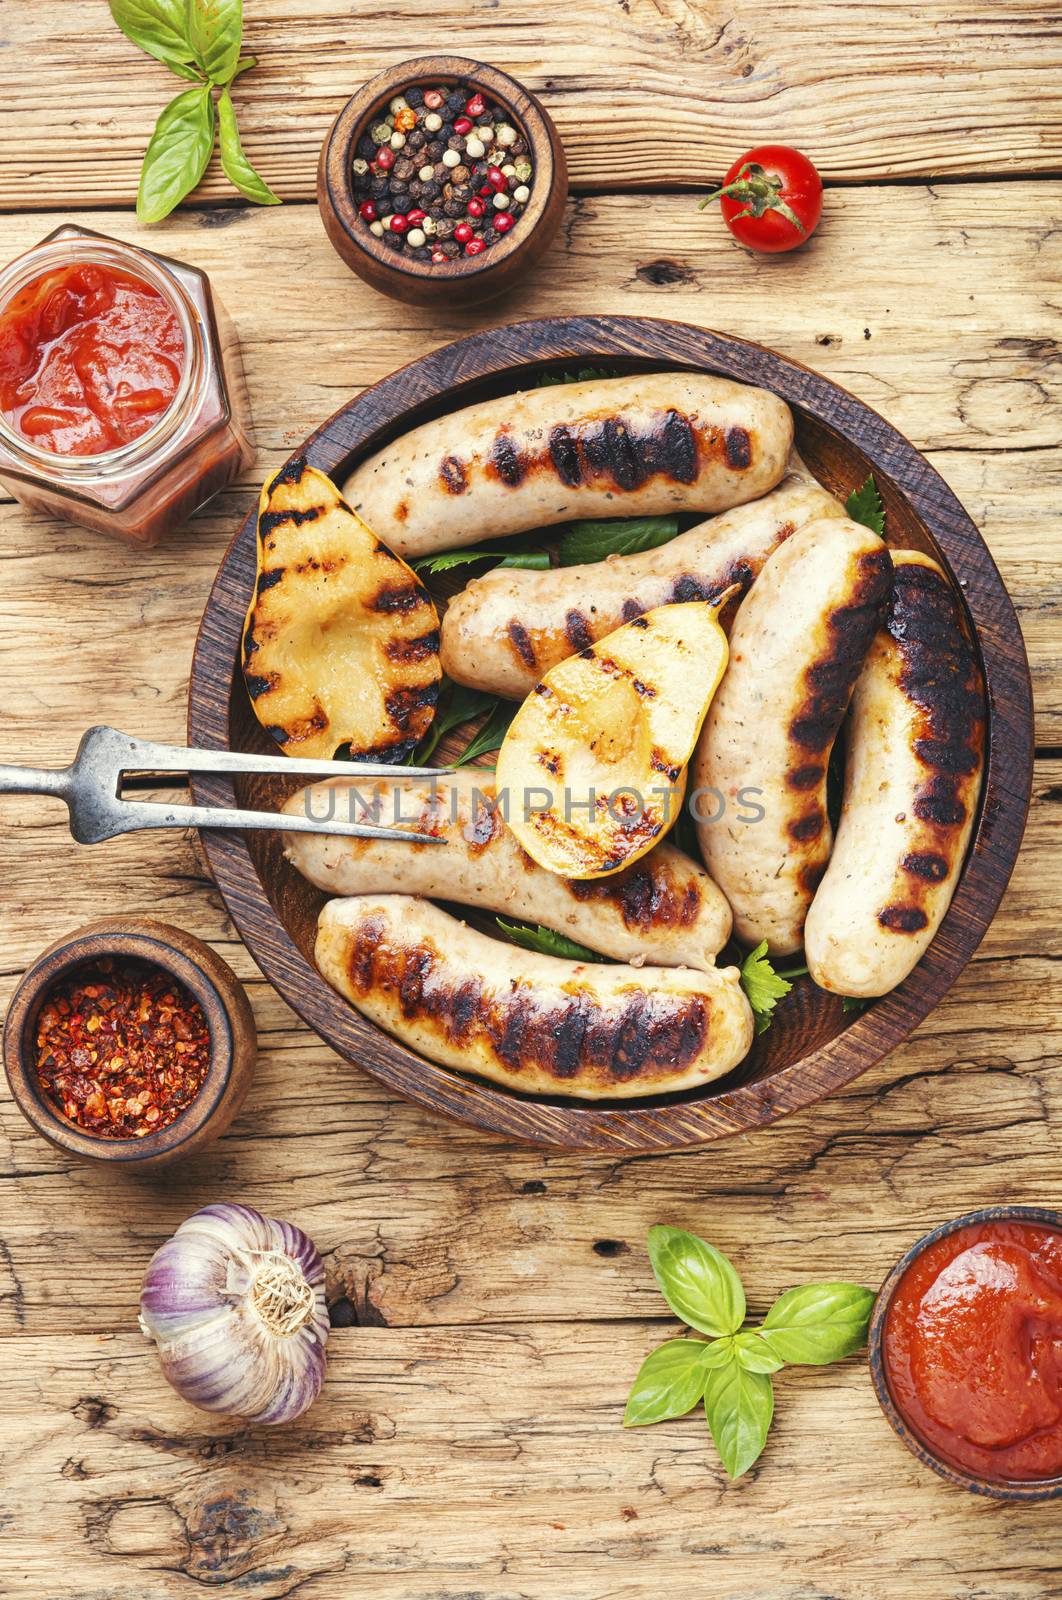 Grilled sausages fried with pear and.Autumn food.Bbq food